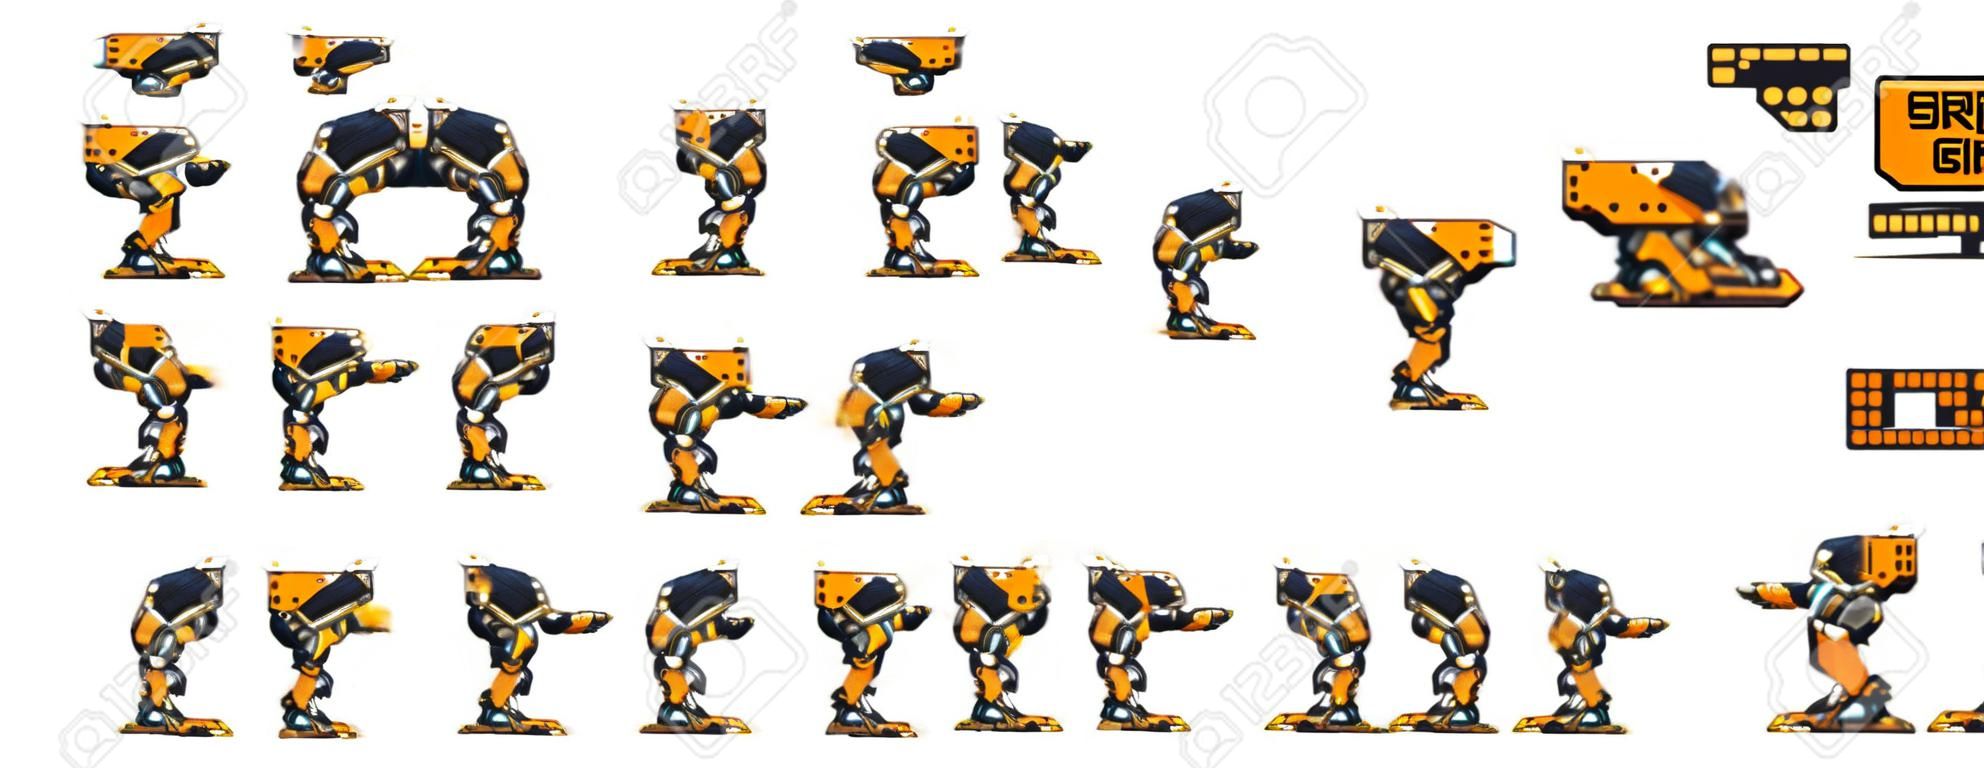 Animated enemy robot game character sprites